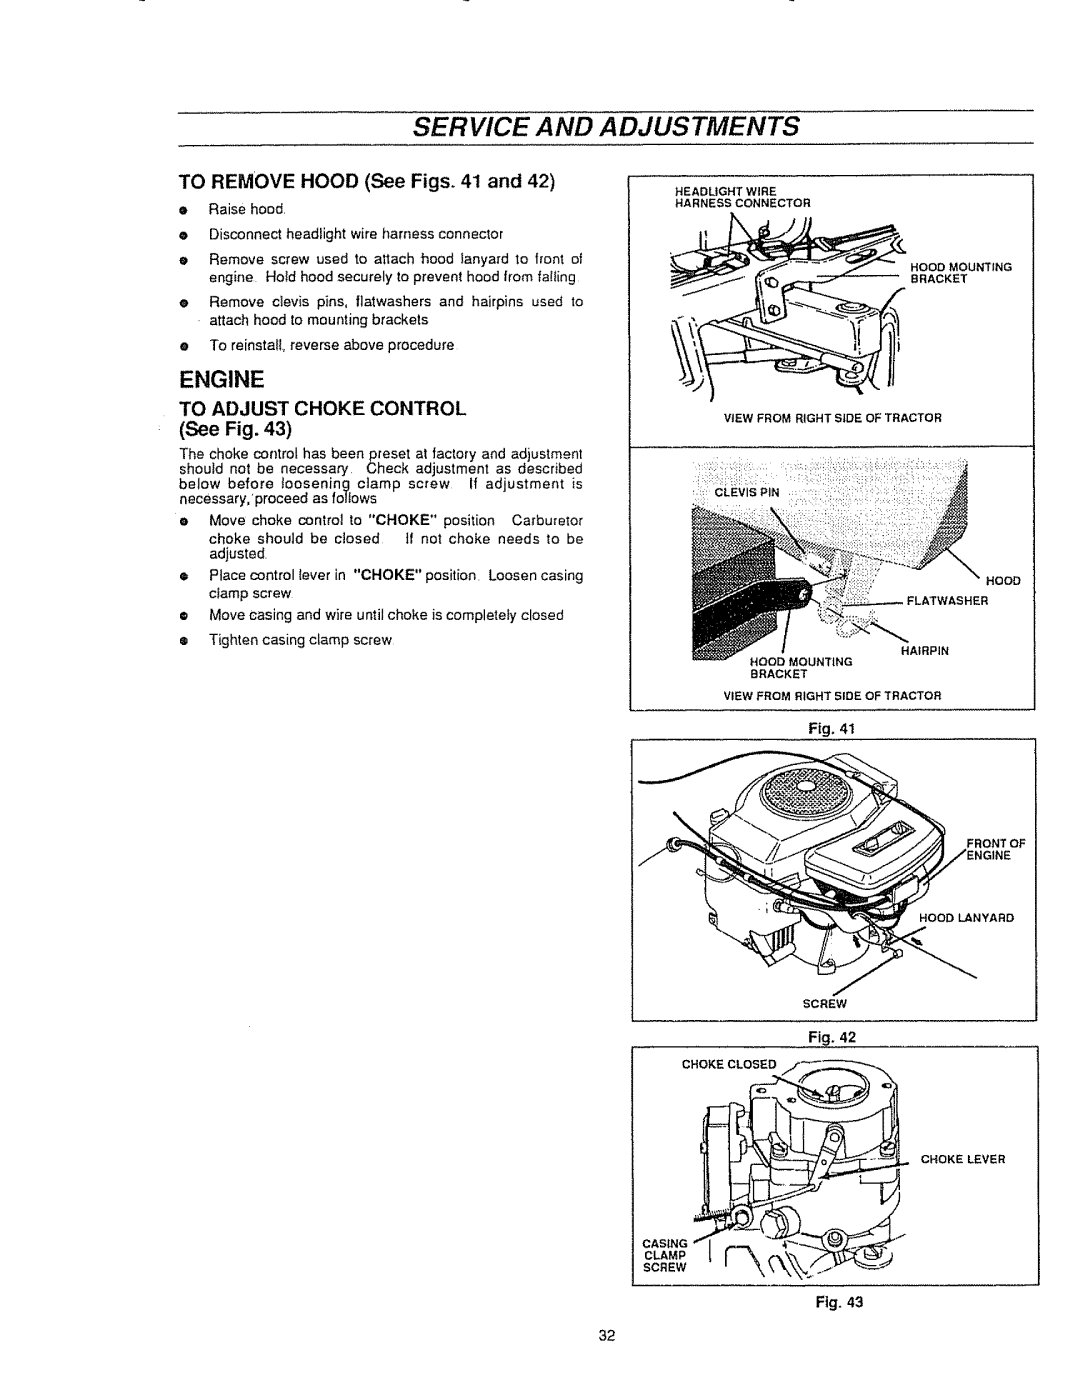 Sears 536.25587 Service And Adjustments, Engine, To Adjust Choke Control, TO REMOVE HOOD See Figs. 41 and, F|g 